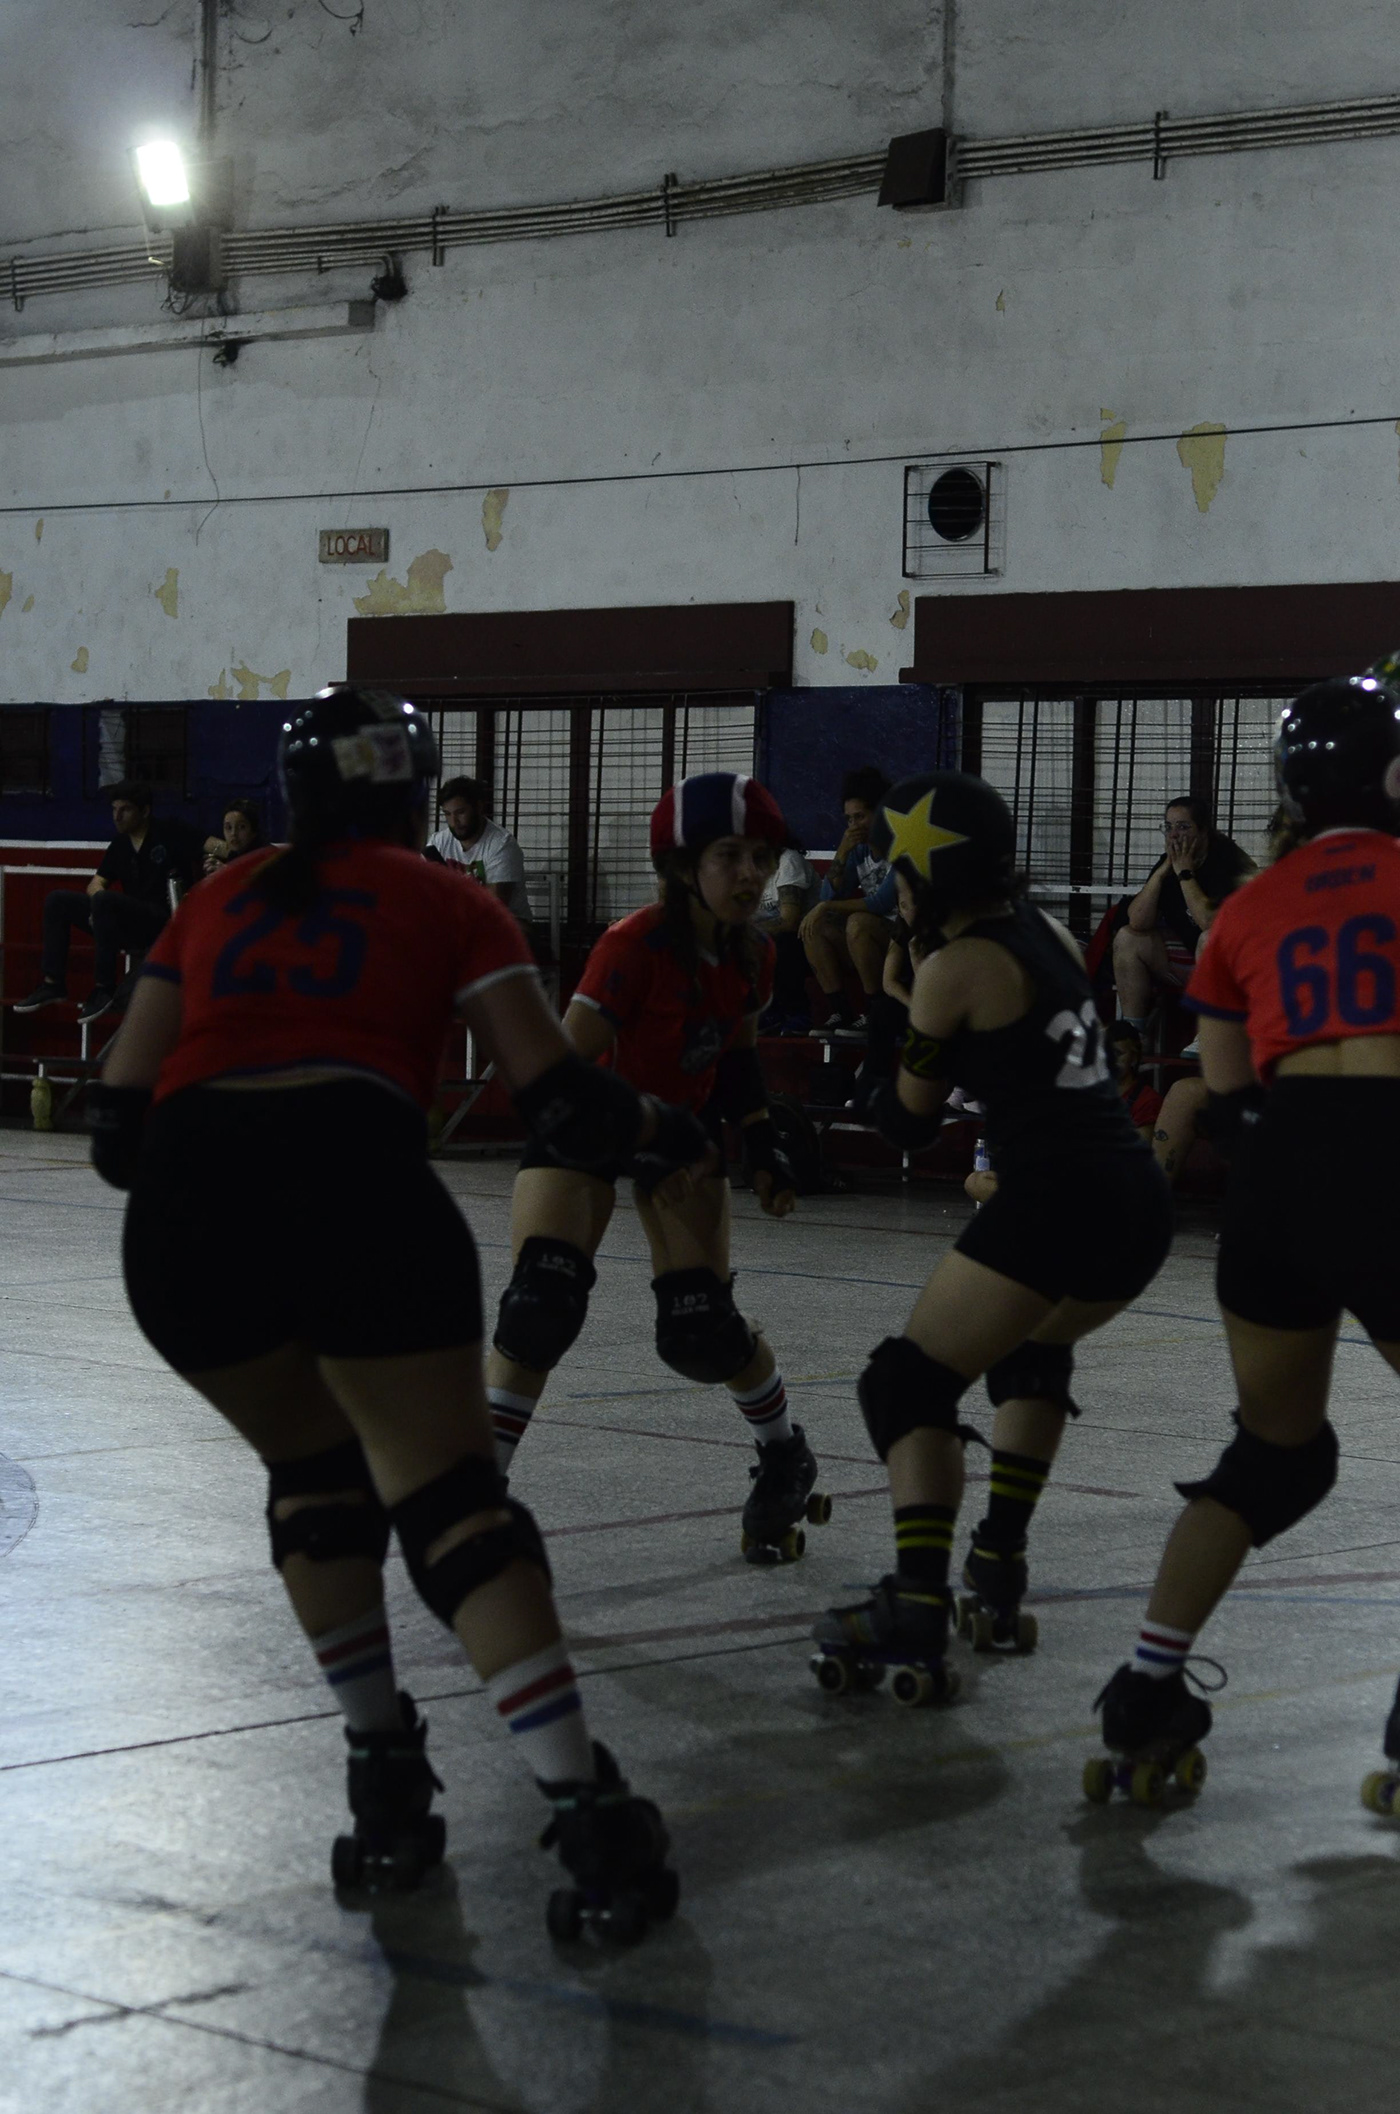 rollerderby Photography  sport